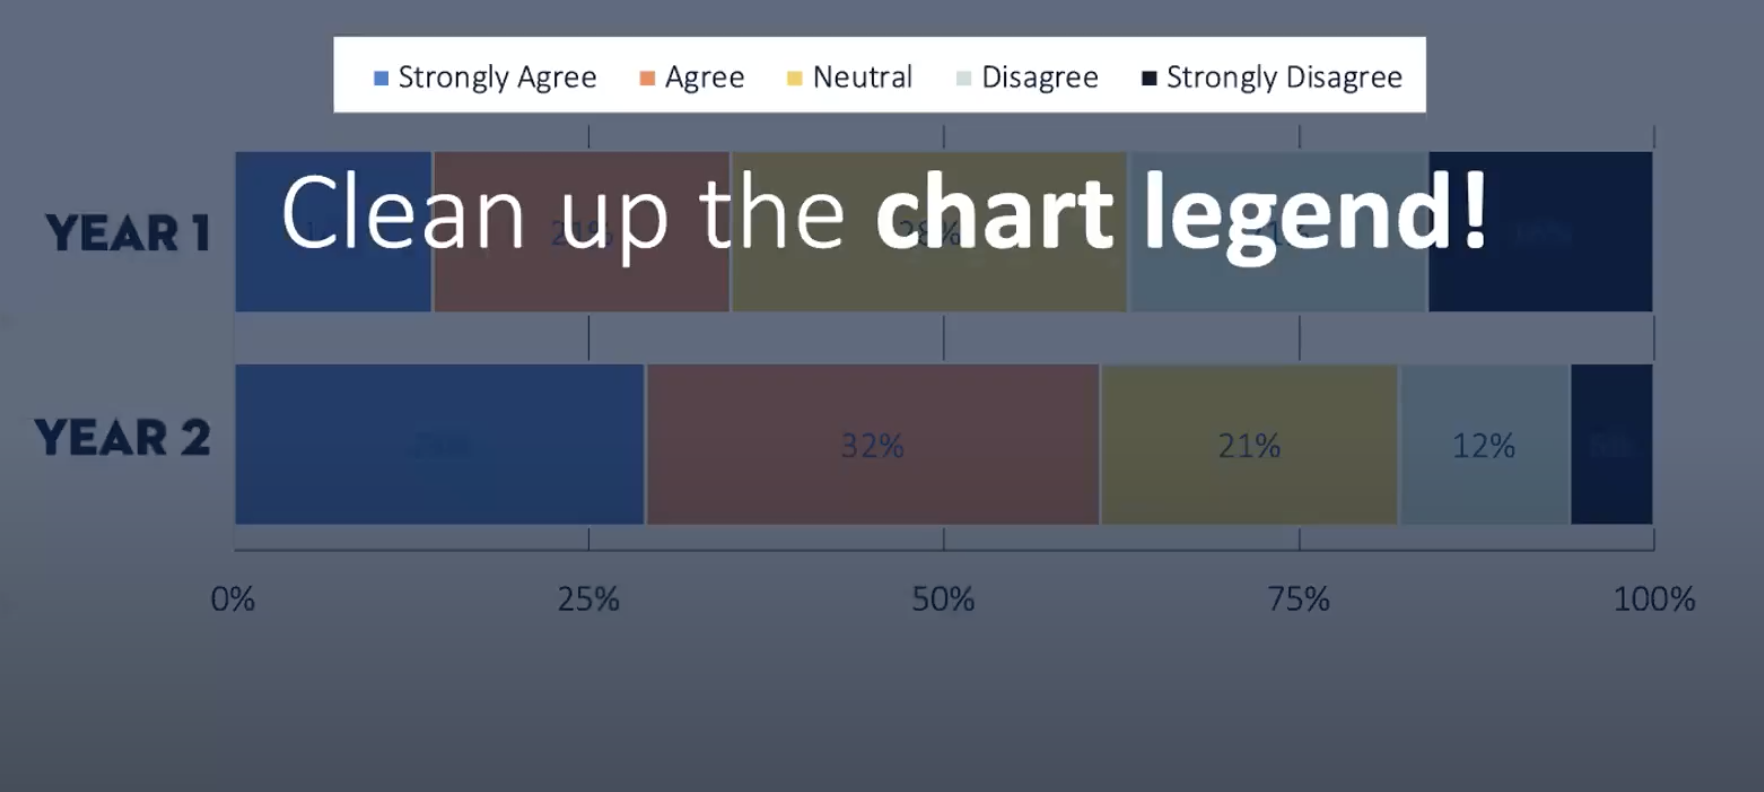 The text "Clean up the chart legend!" is overlaid on top of the chart